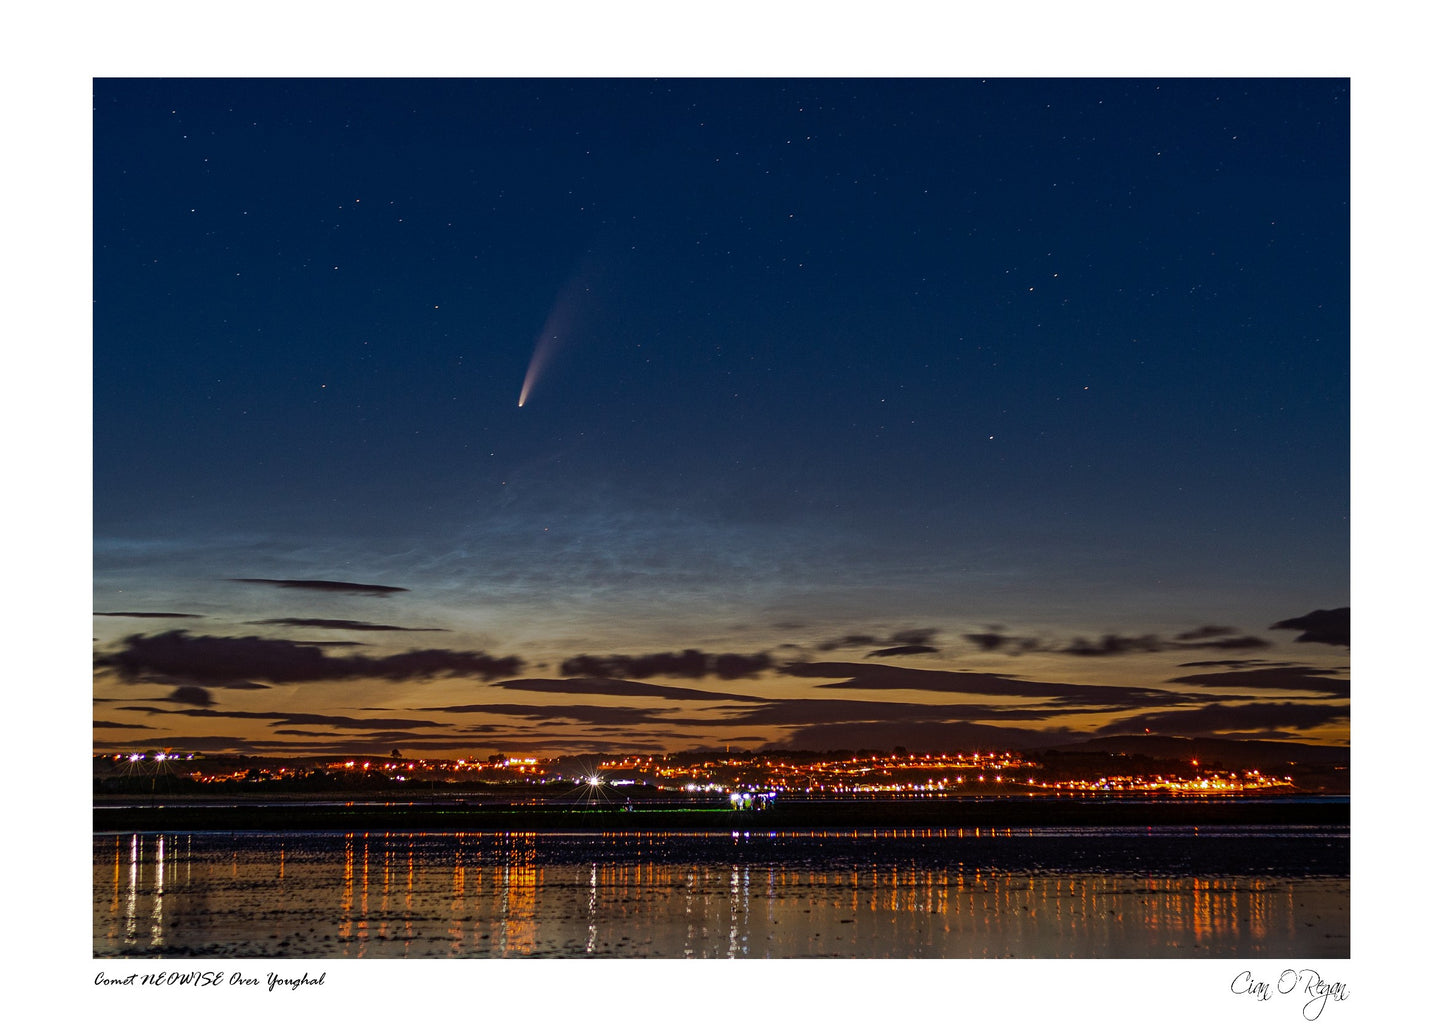 Comet NEOWISE Over Youghal